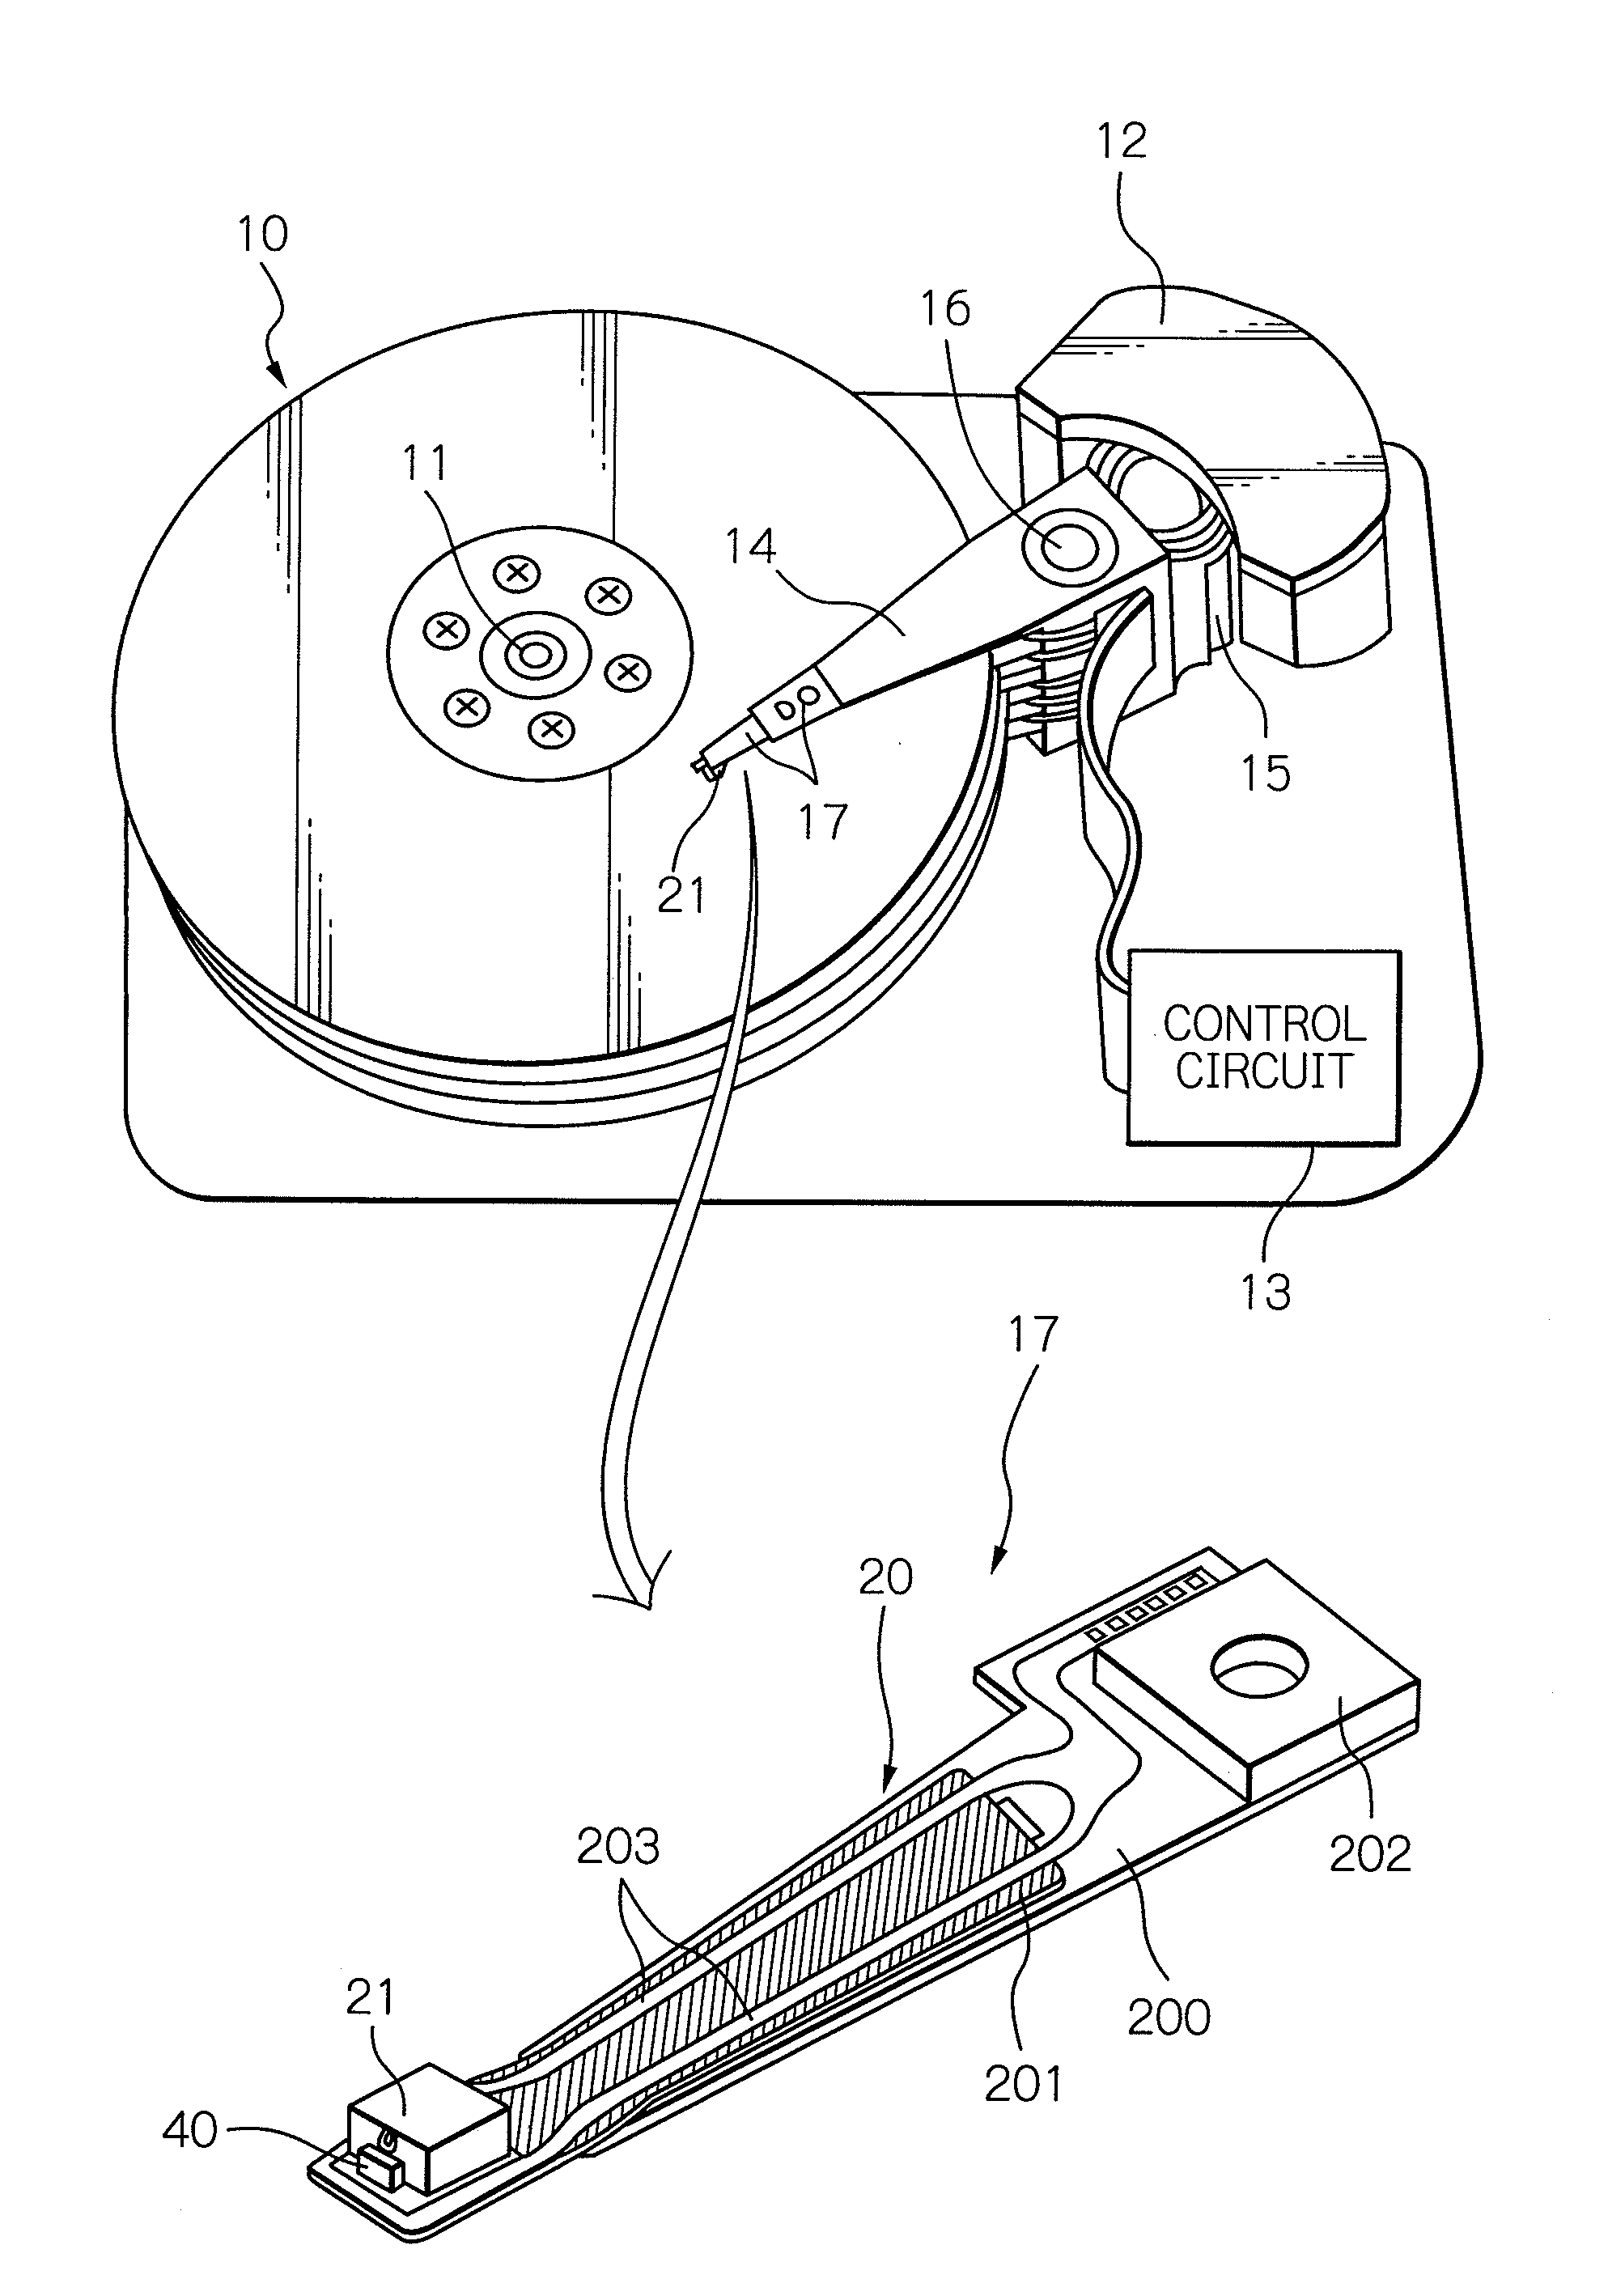 Thermally-Assisted Magnetic Recording Head Comprising Light Source with Photonic-Band Layer